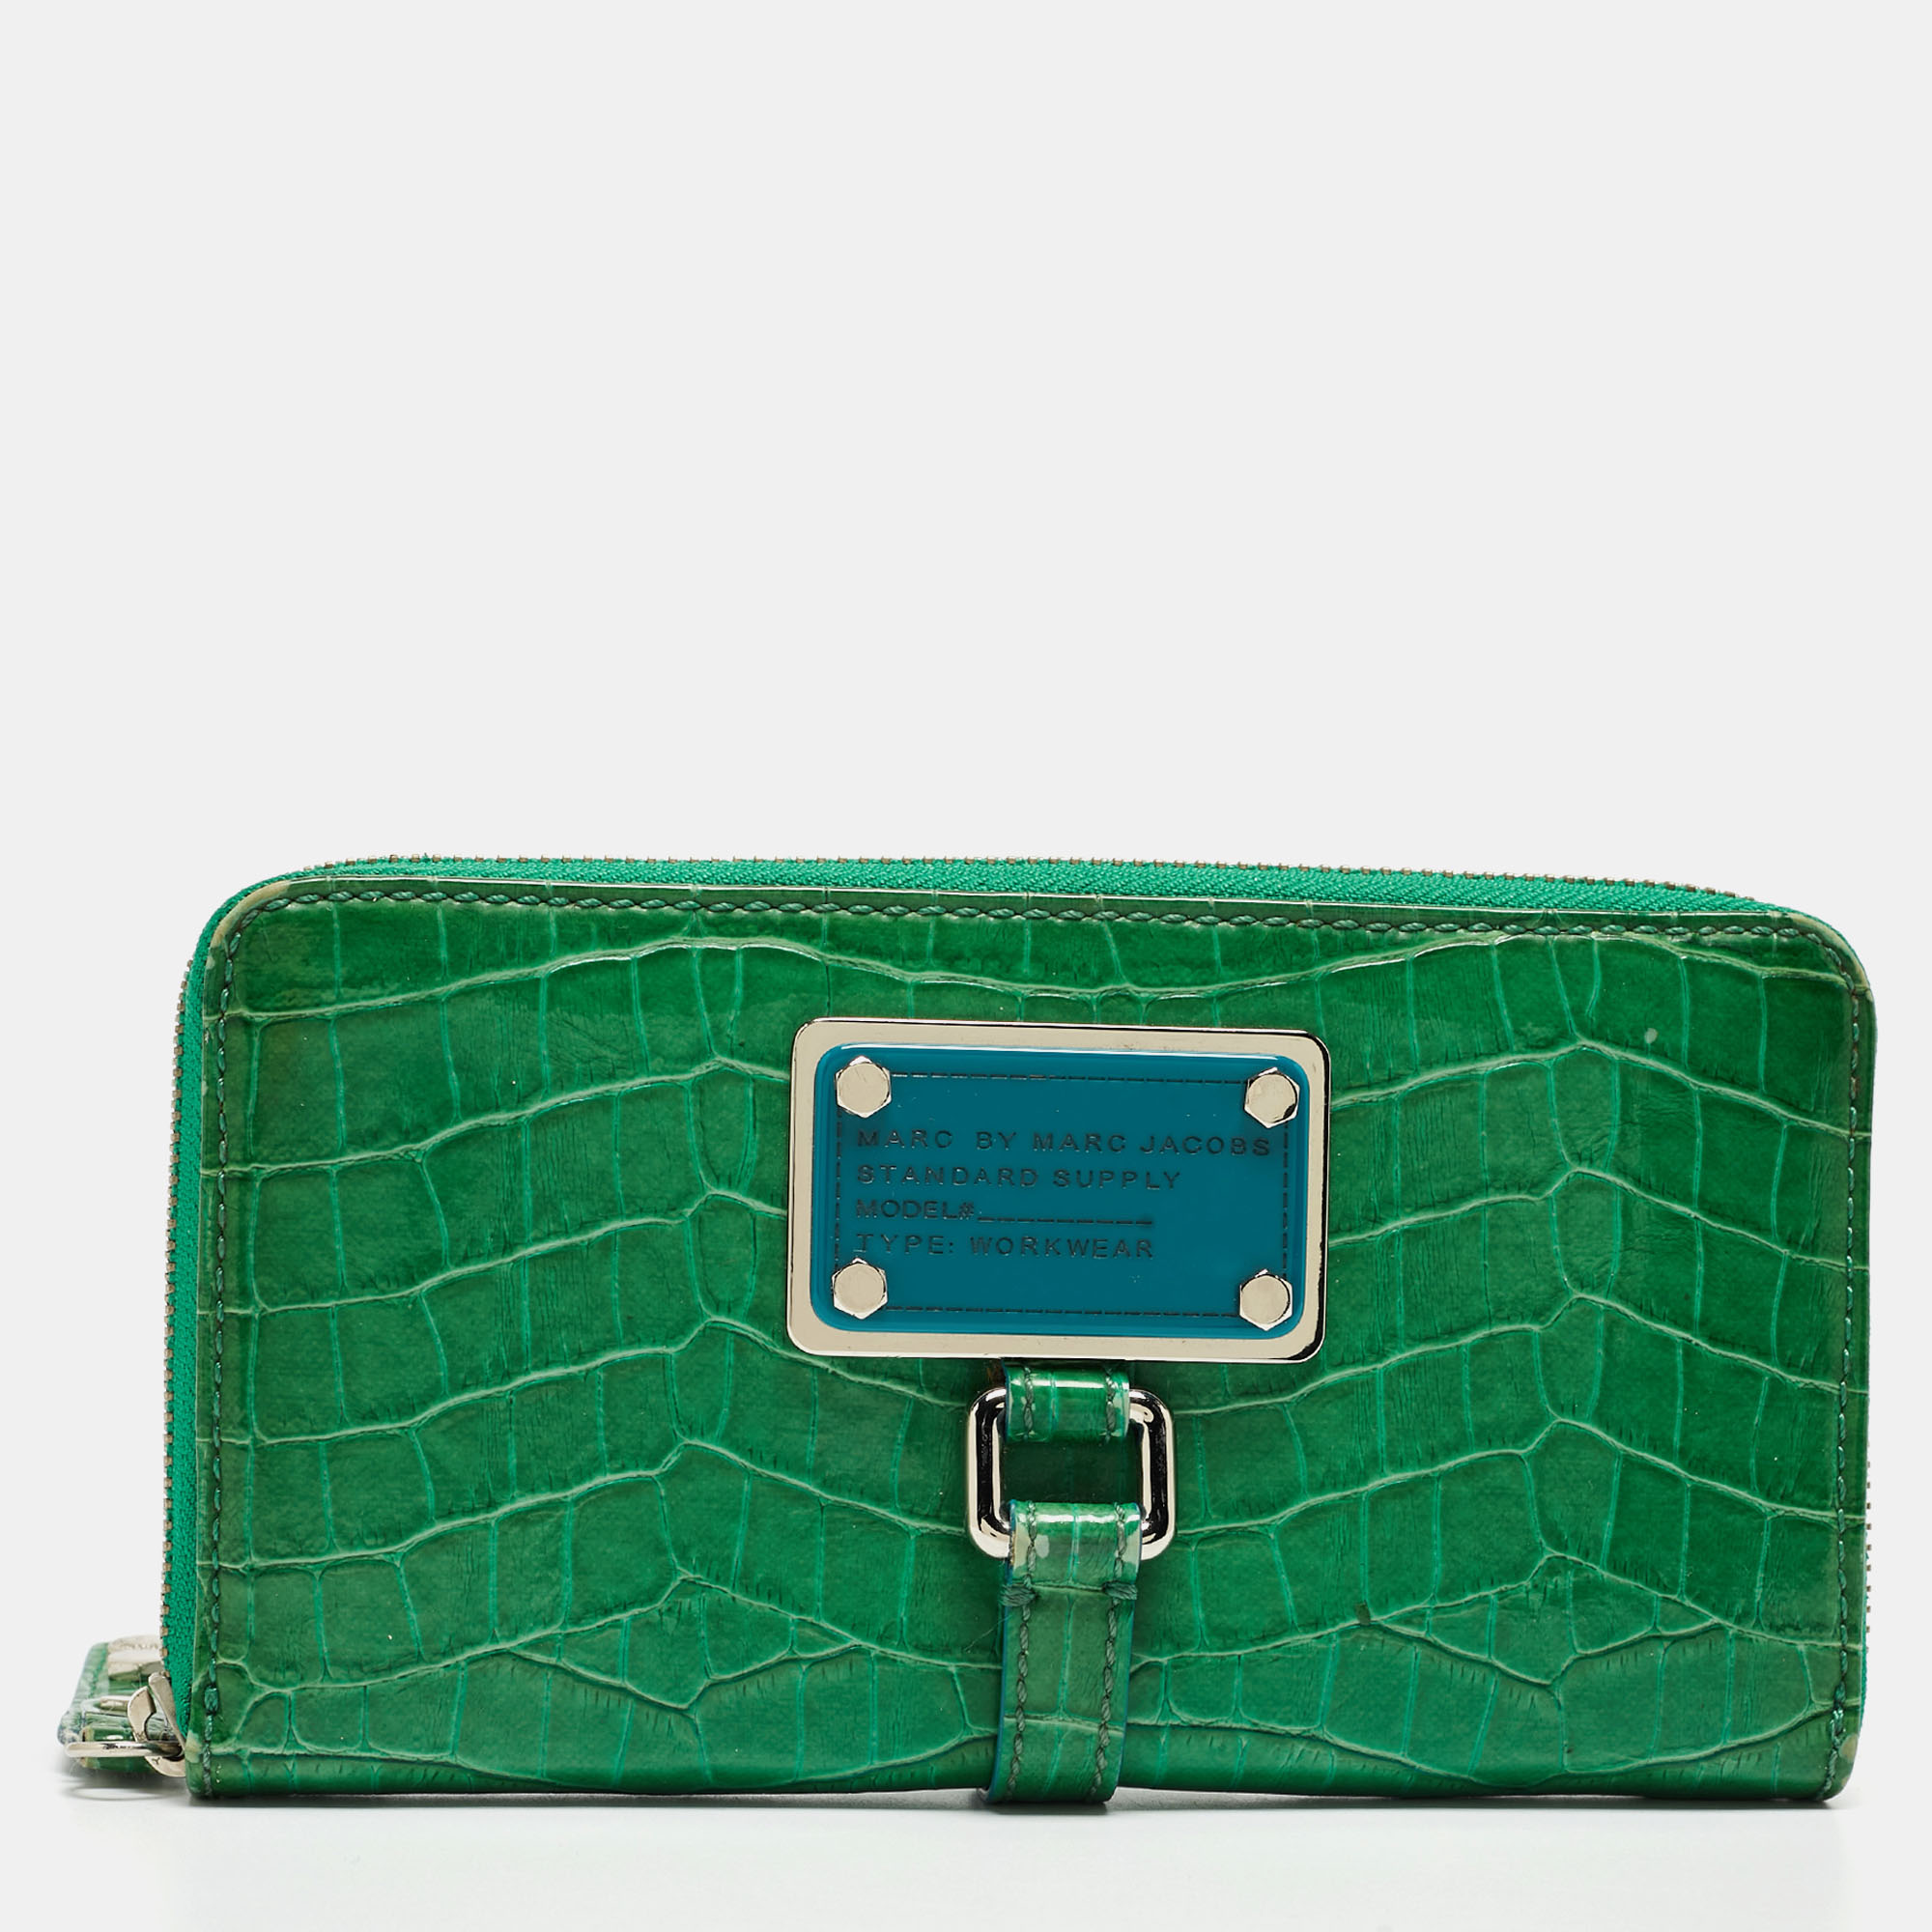 

Marc by Marc Jacobs Green Croc Embossed Patent Leather Zip Around Wallet